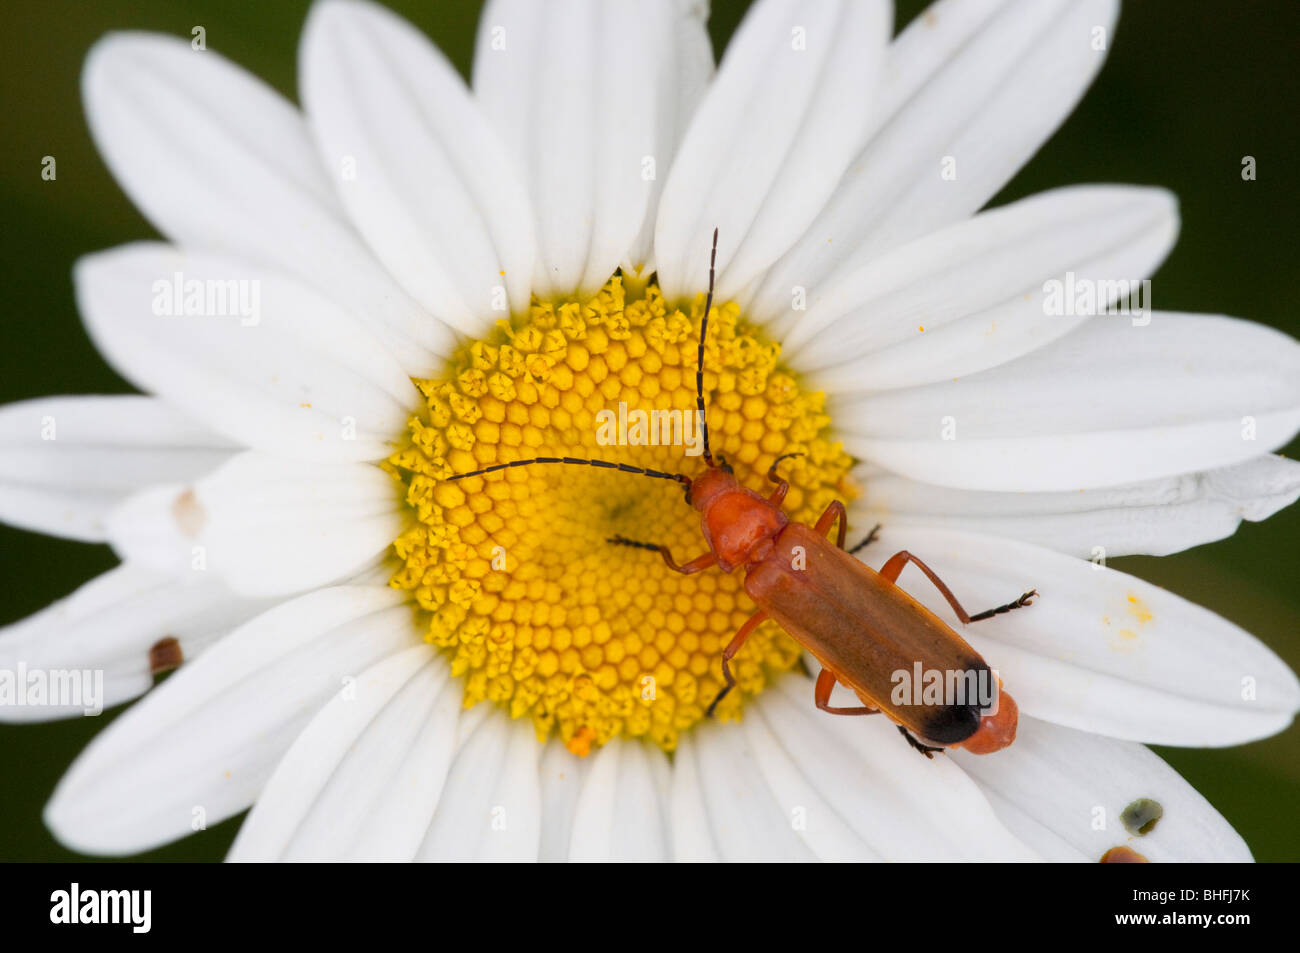 Soldier Beetle (Cantharis rustica), on Ox-ey Daisy Stock Photo